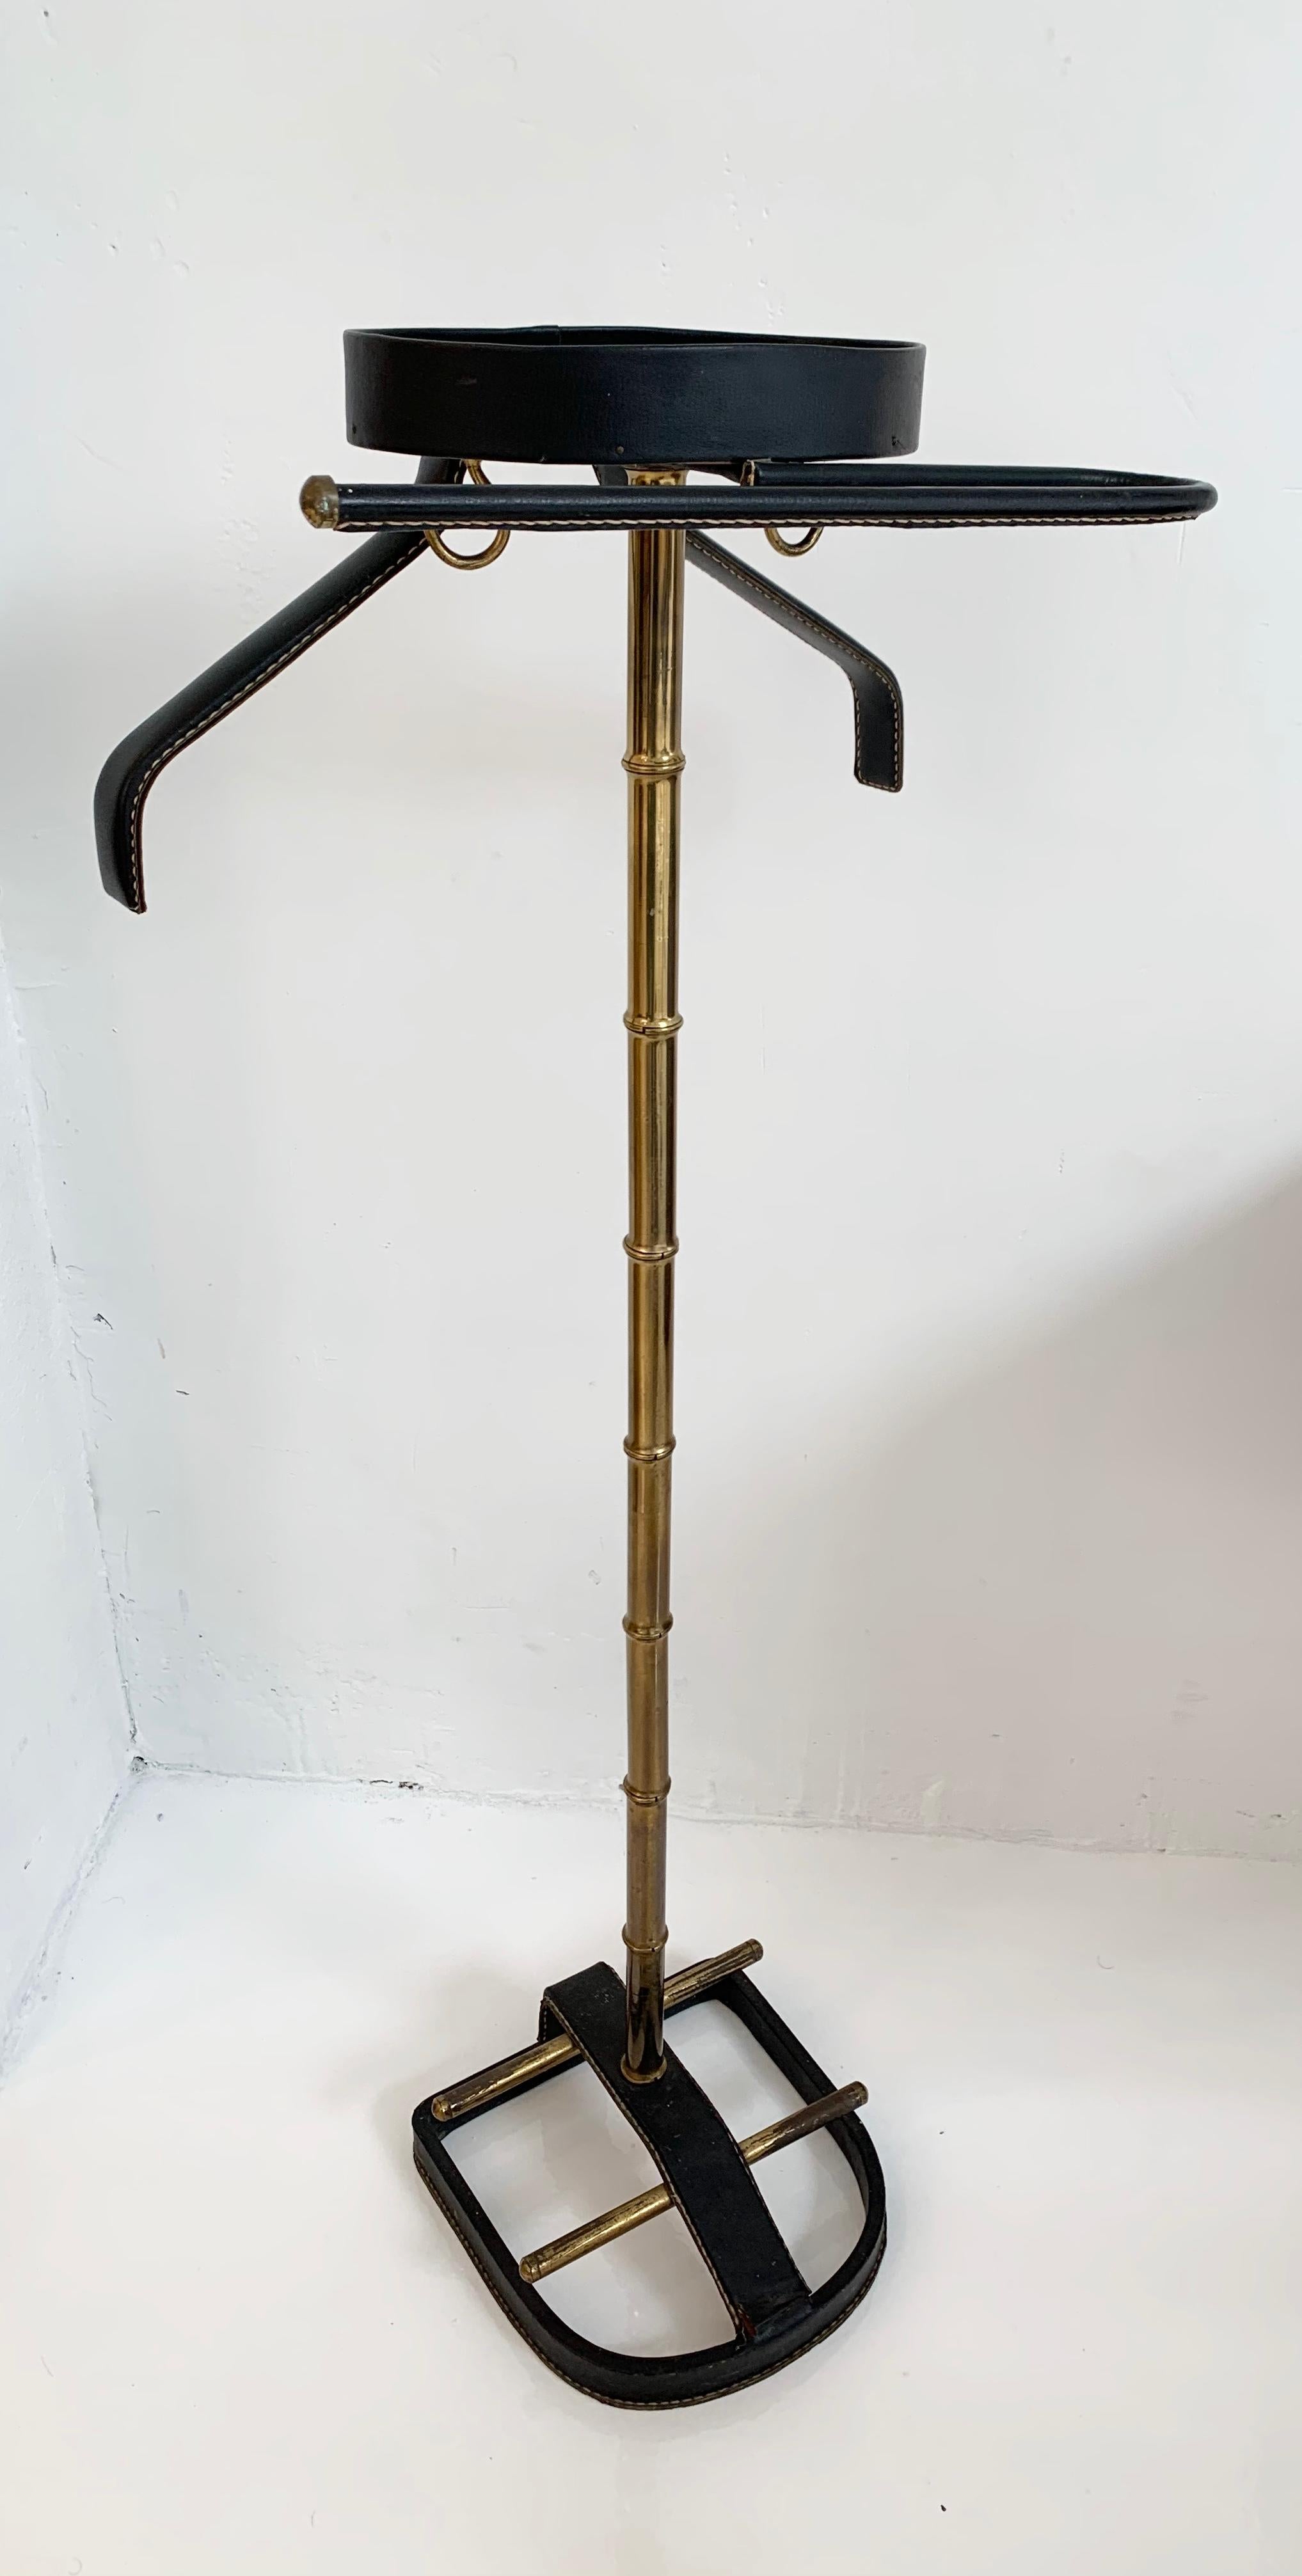 Handsome coat stand or valet by Jacques Adnet. Entire top and bottom wrapped in leather with brass bamboo neck connecting the two. Coat hanger, pant hanger and catch all dish for keys/ wallet at the top. Wrapped in black leather with signature Adnet